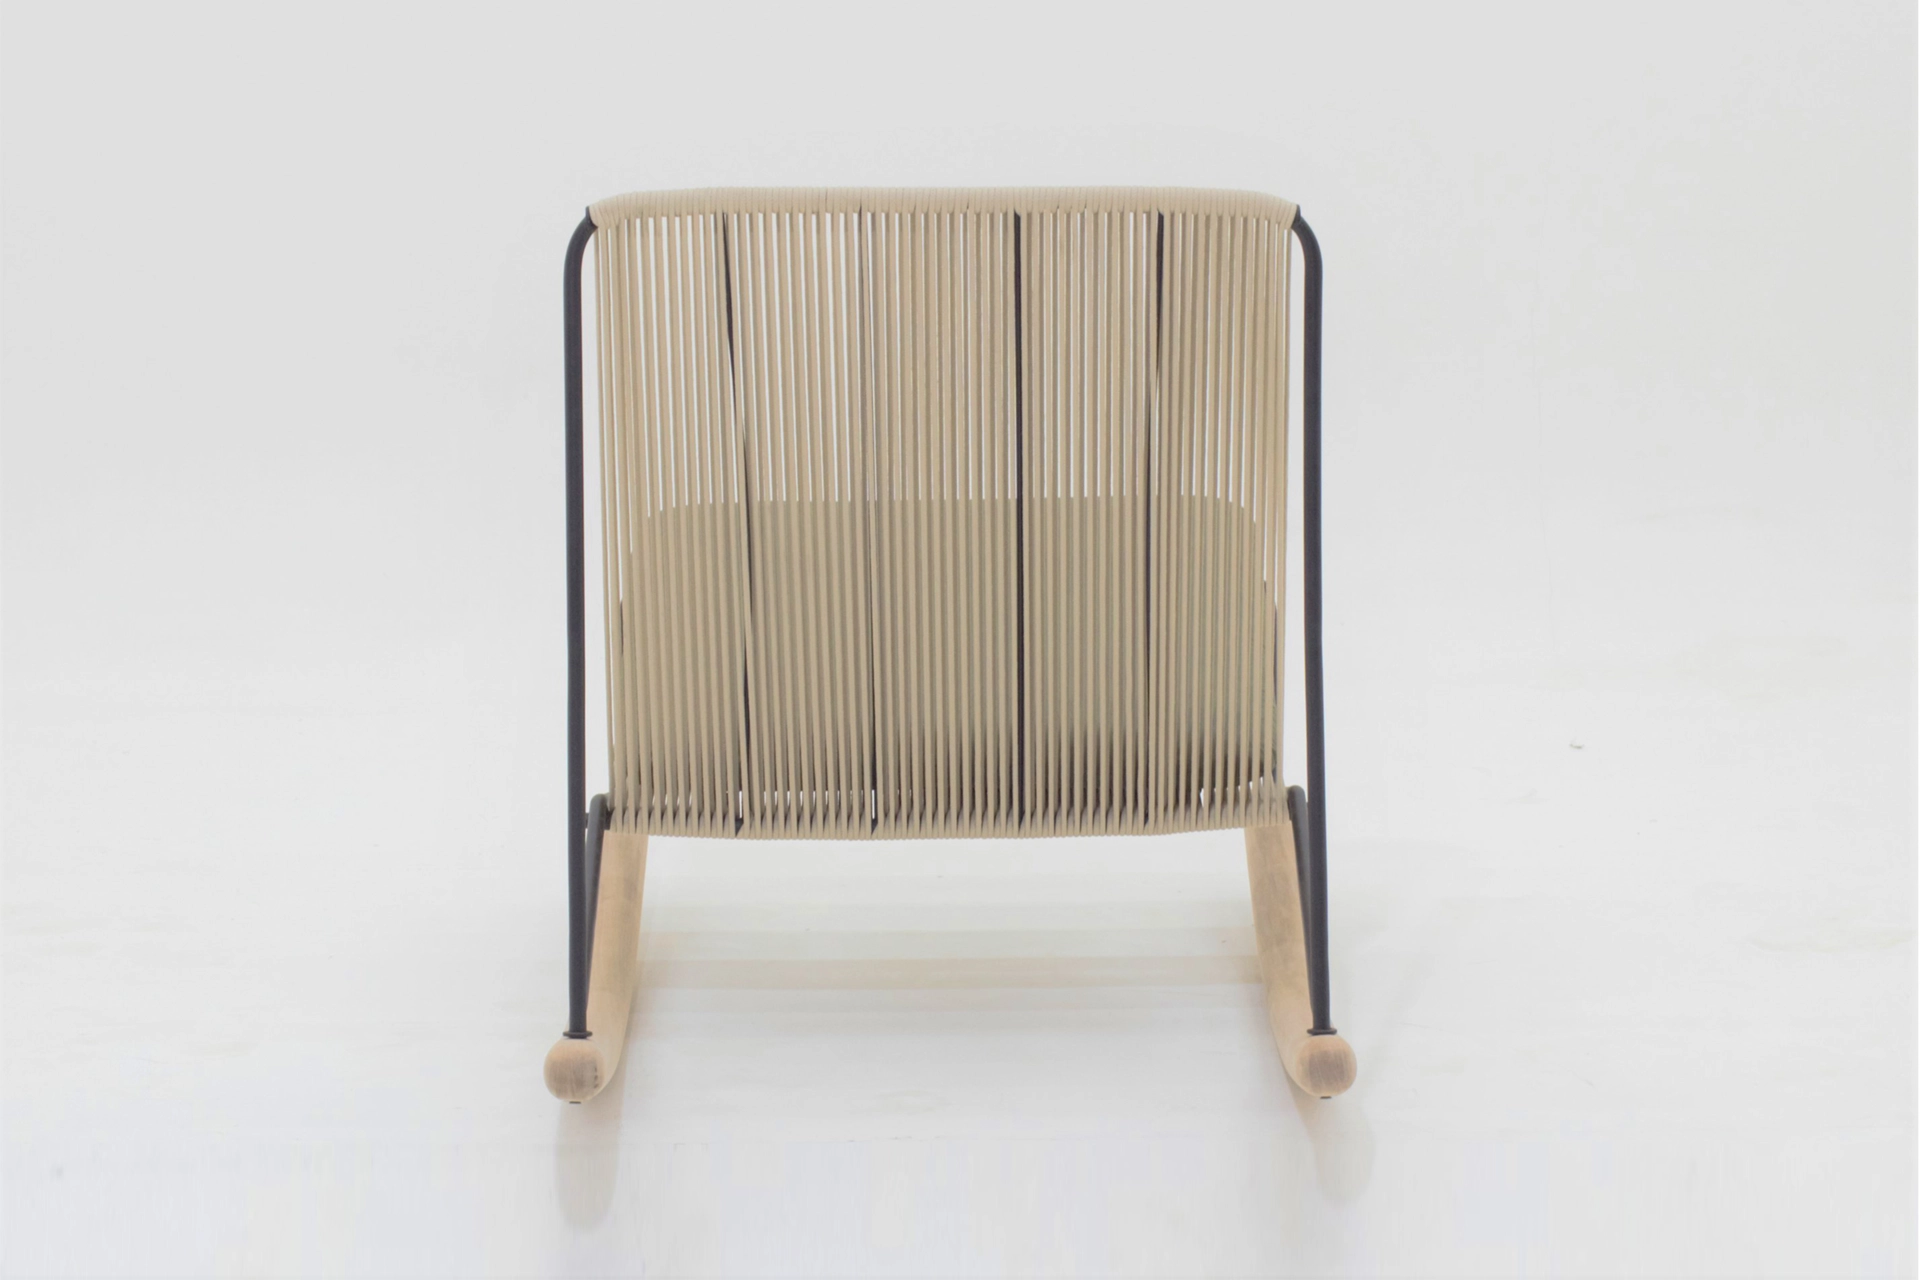 Marcelo Rocking Chair │ 2022